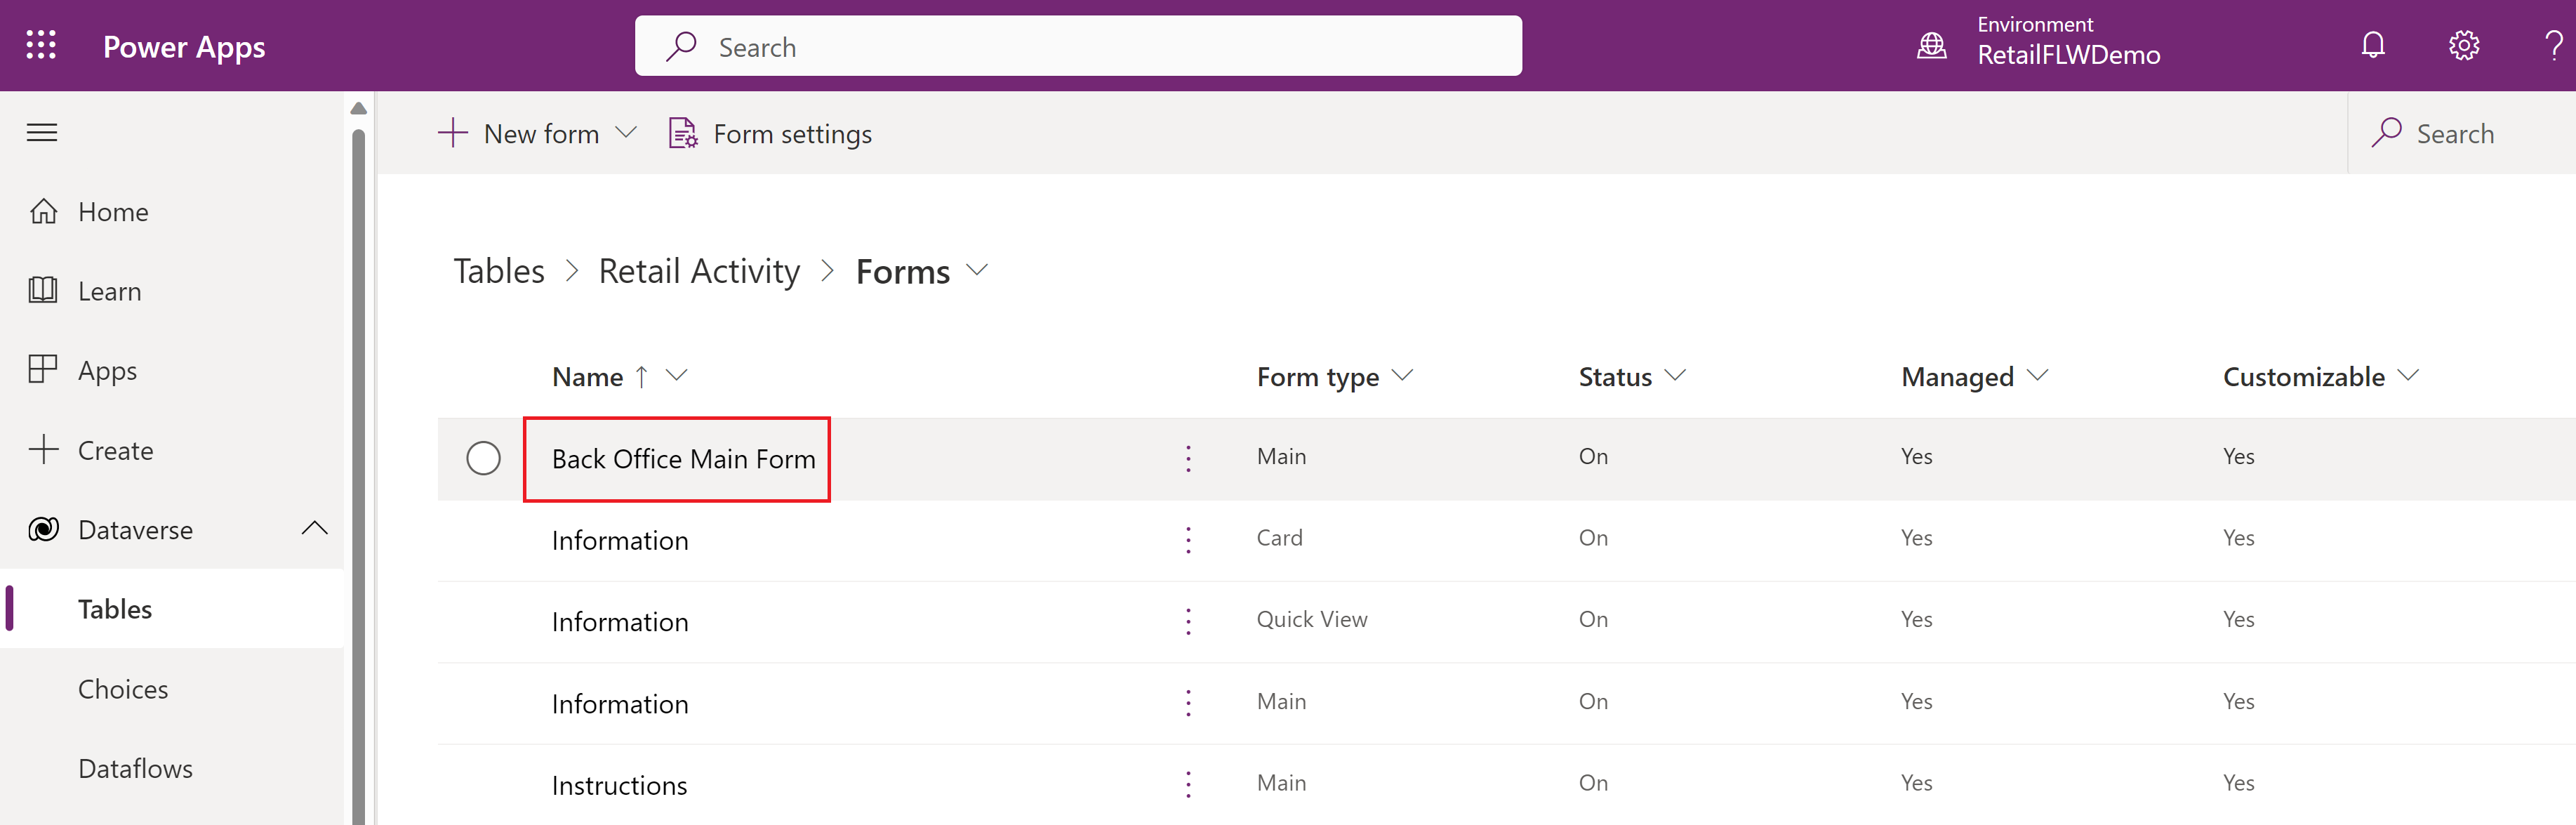 Select back office main form to create a new customized form.